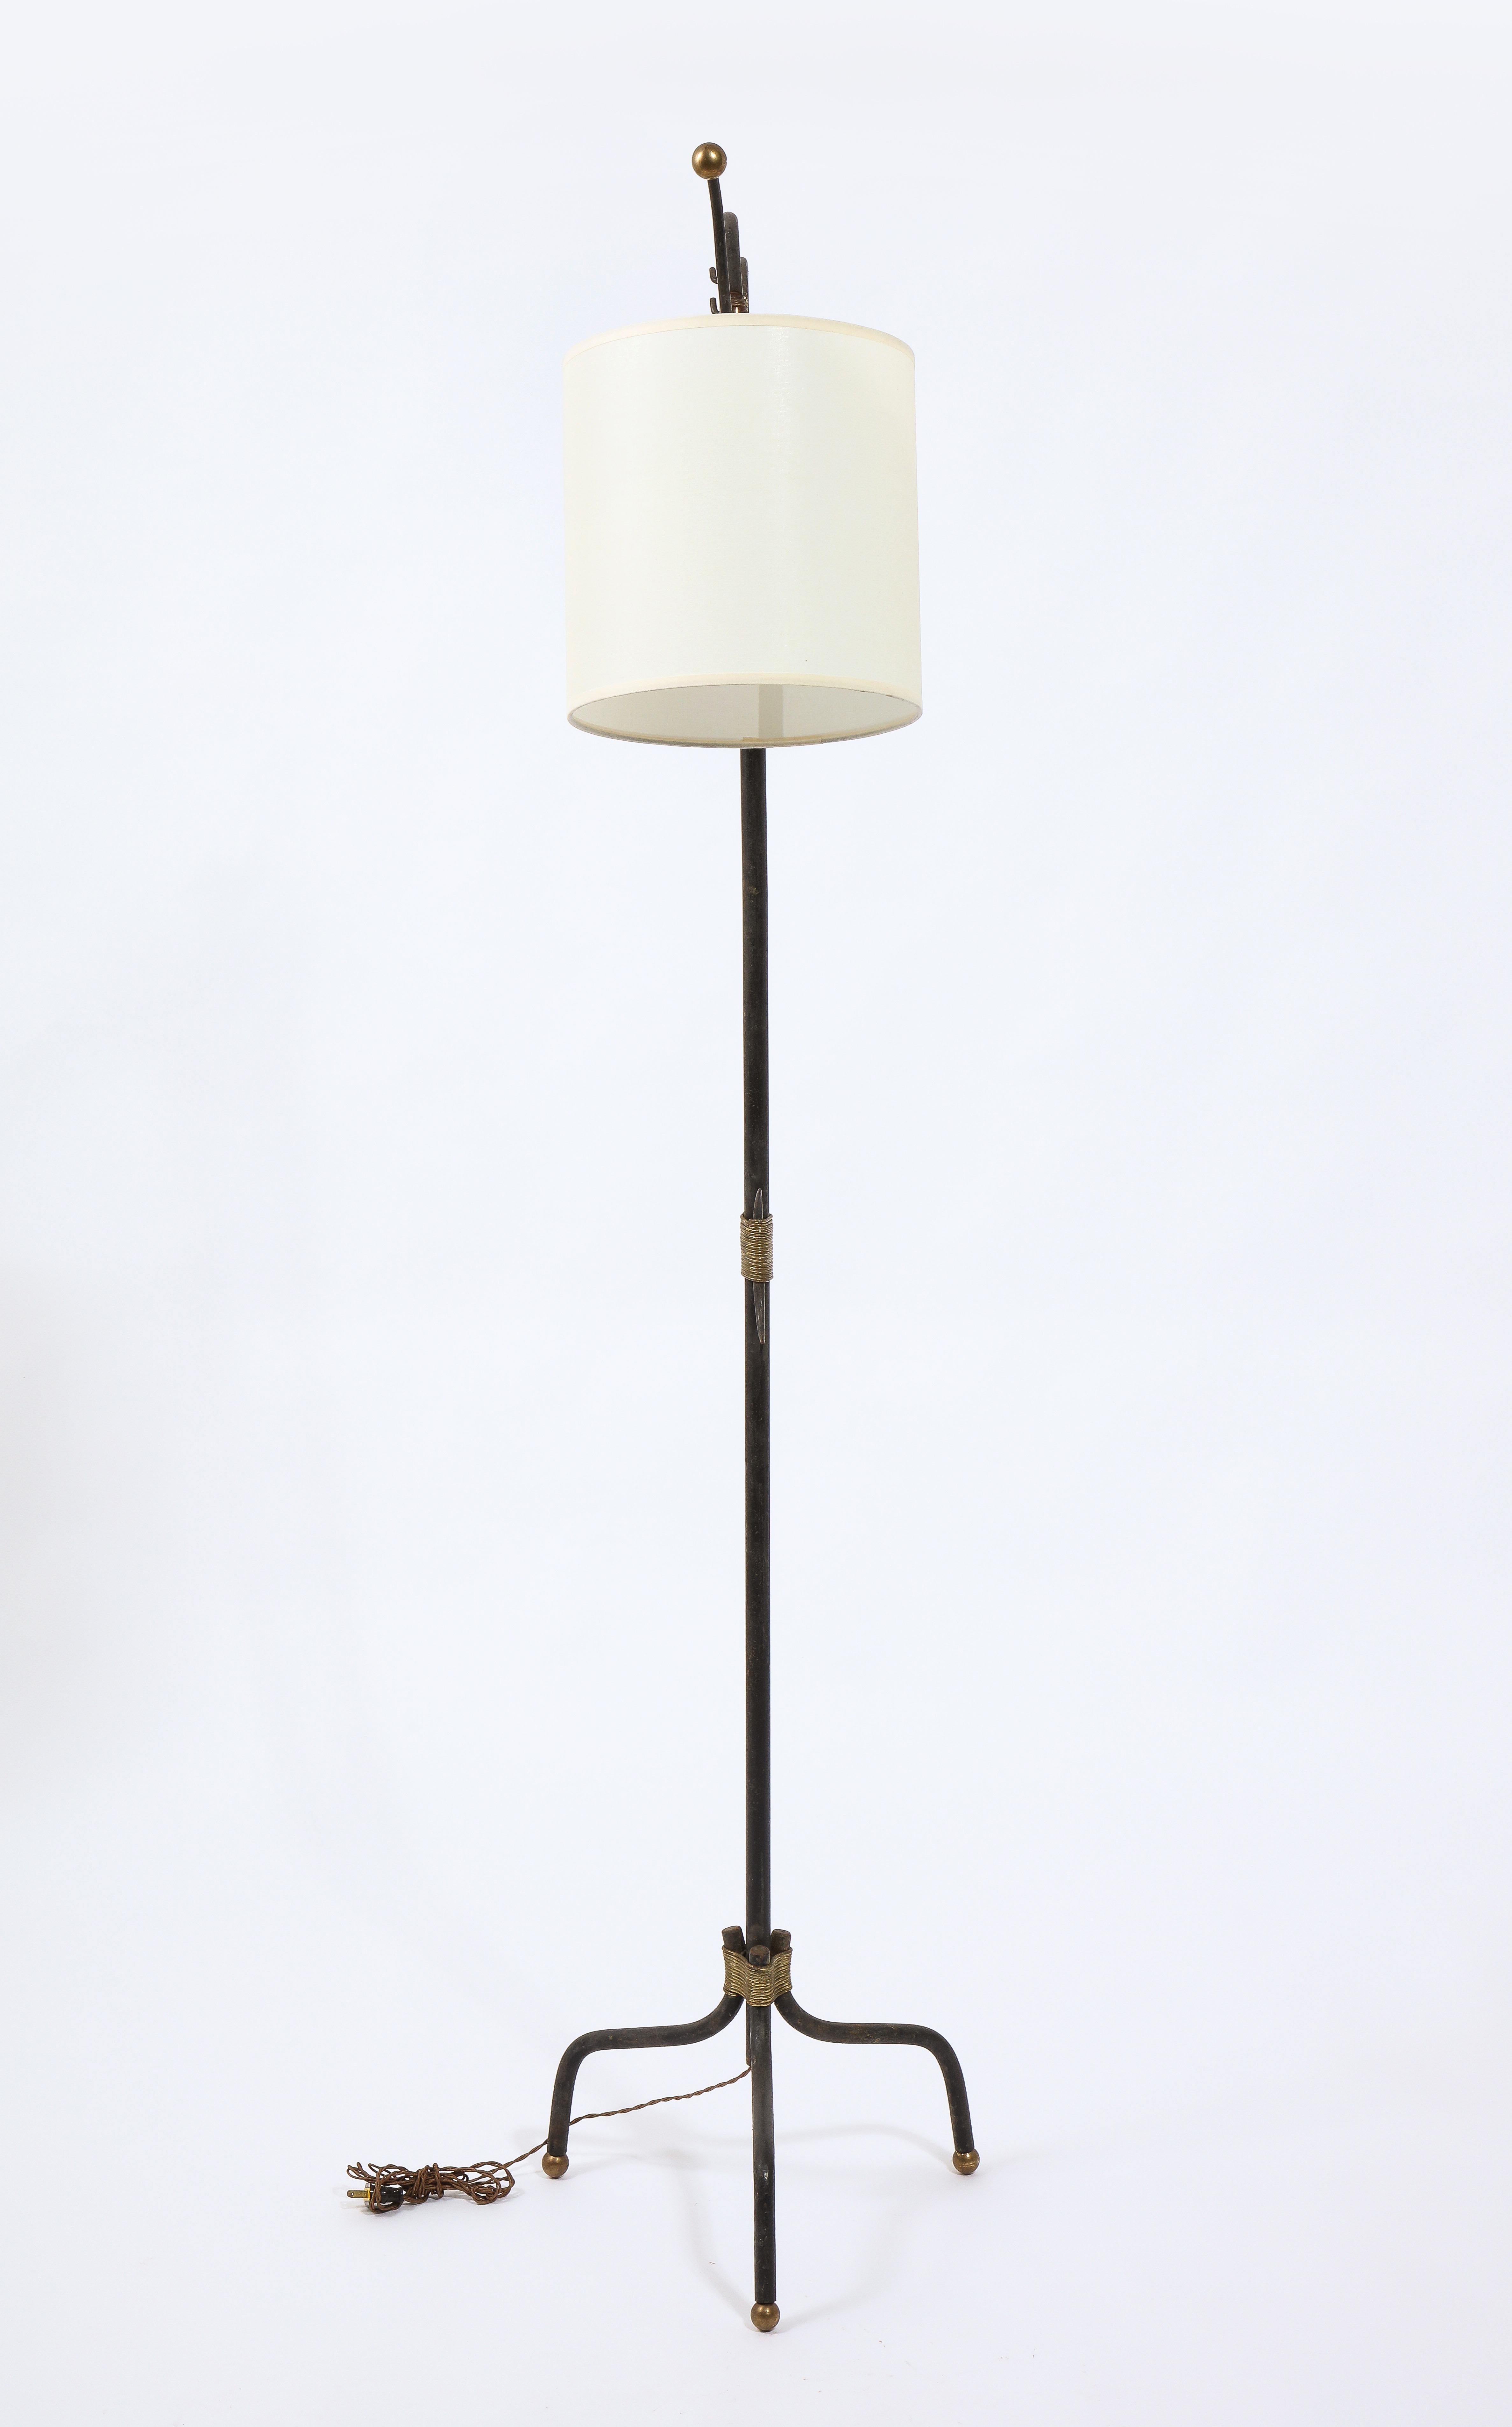 Adjustable Tripodal Cantilevered Wrought Iron & Brass Floor Lamp, France 1950's For Sale 8